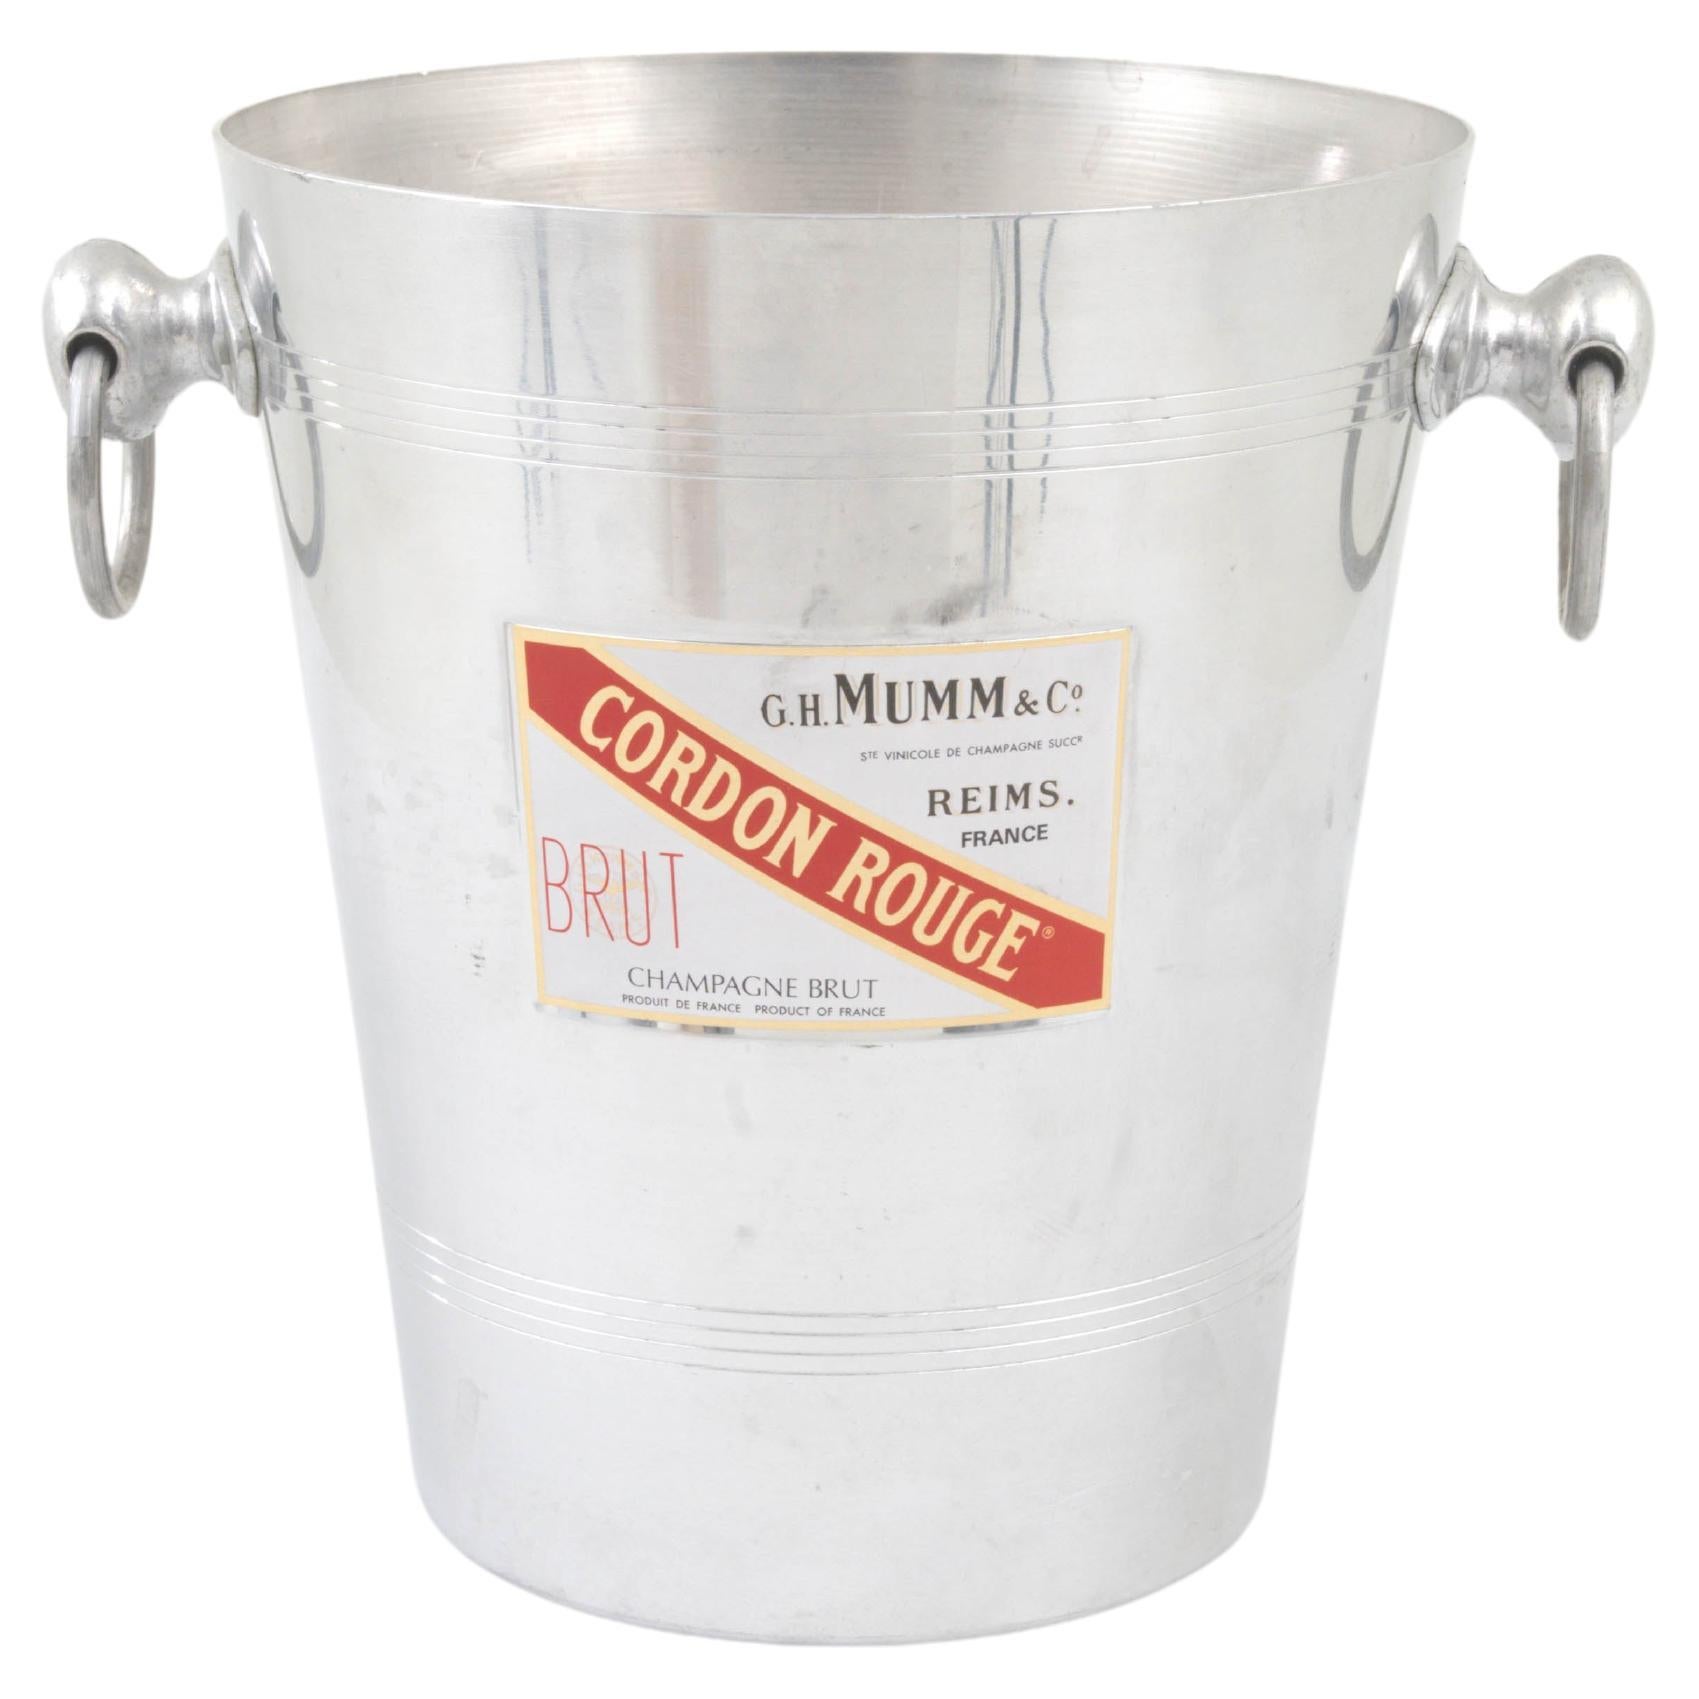 20th Century French Metal Ice Bucket